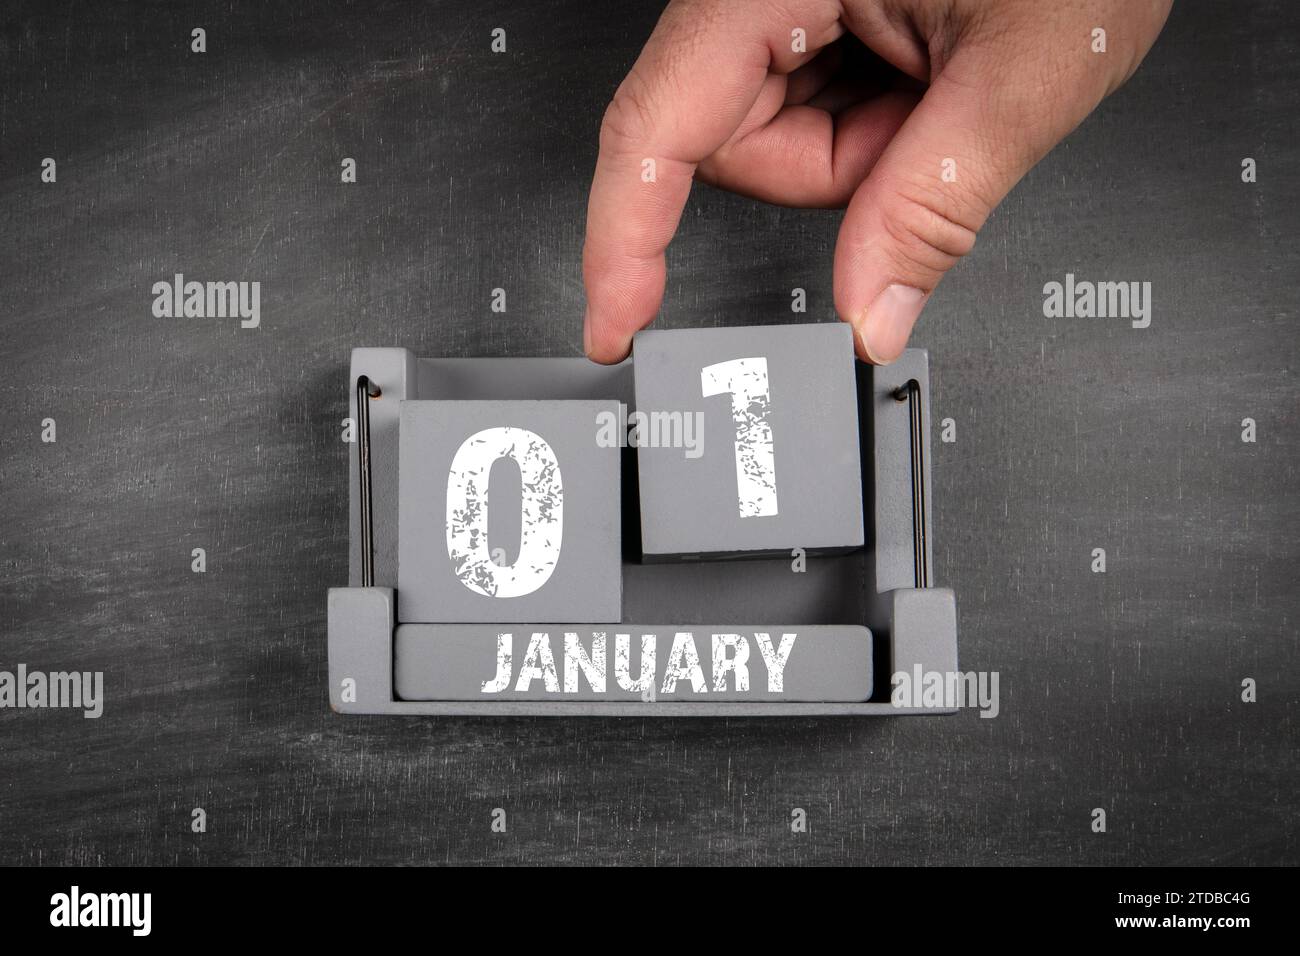 January 1. Black scratched textured chalkboard background. Stock Photo